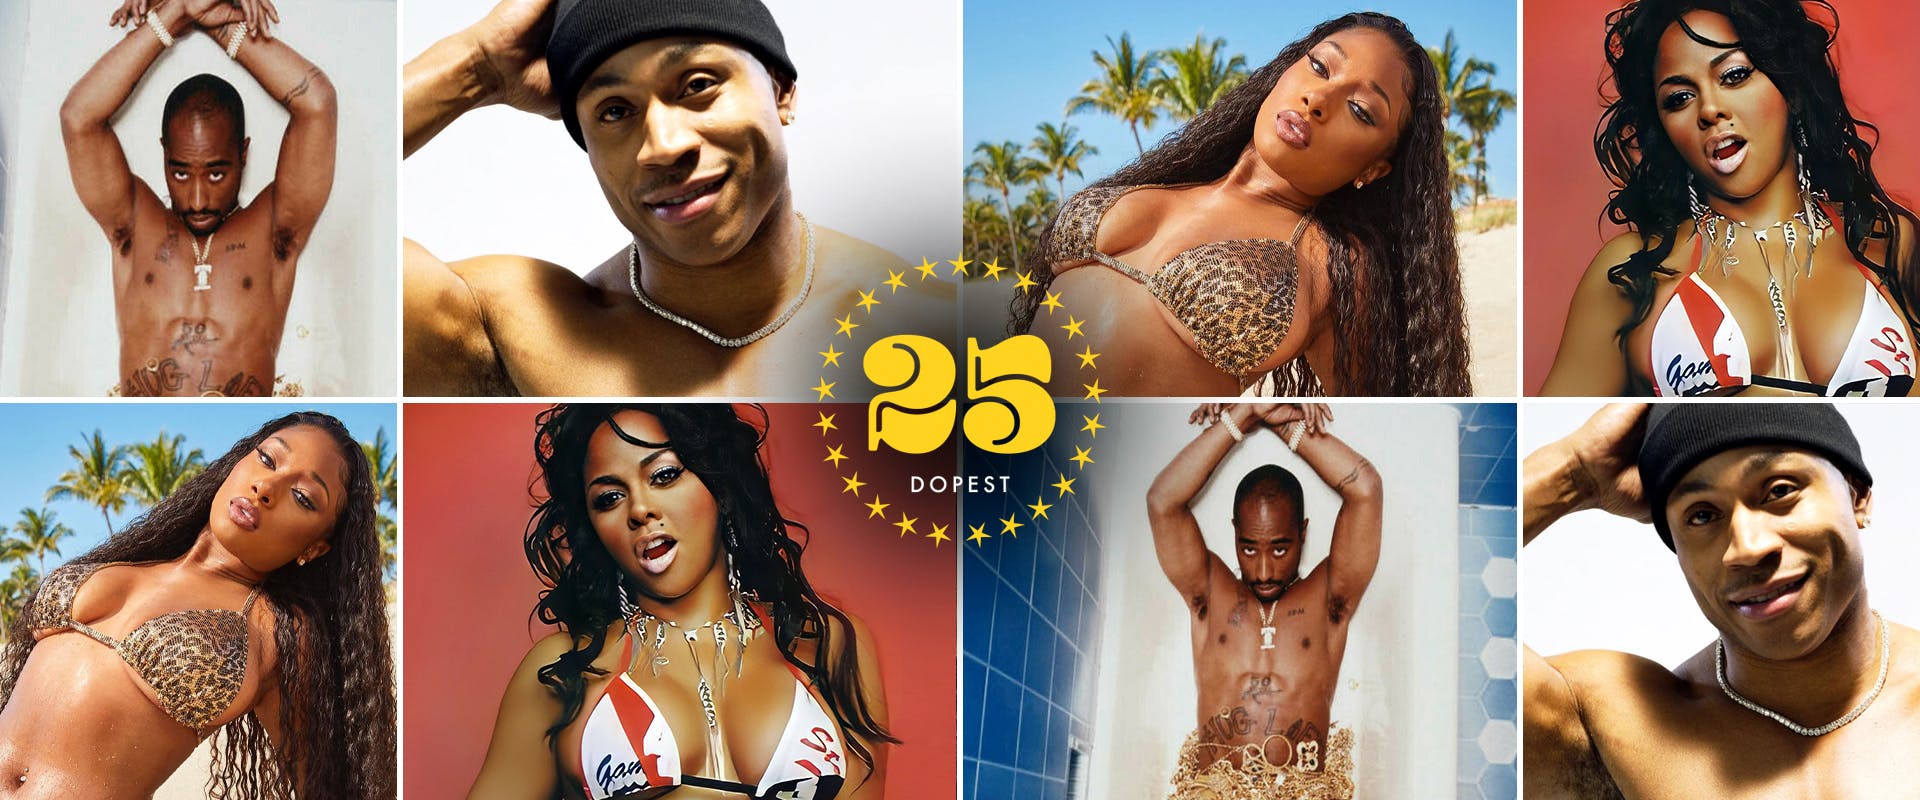 Saxe Girl Boy Video School - How Many Licks: The 25 Dopest Rap Songs to F*** To